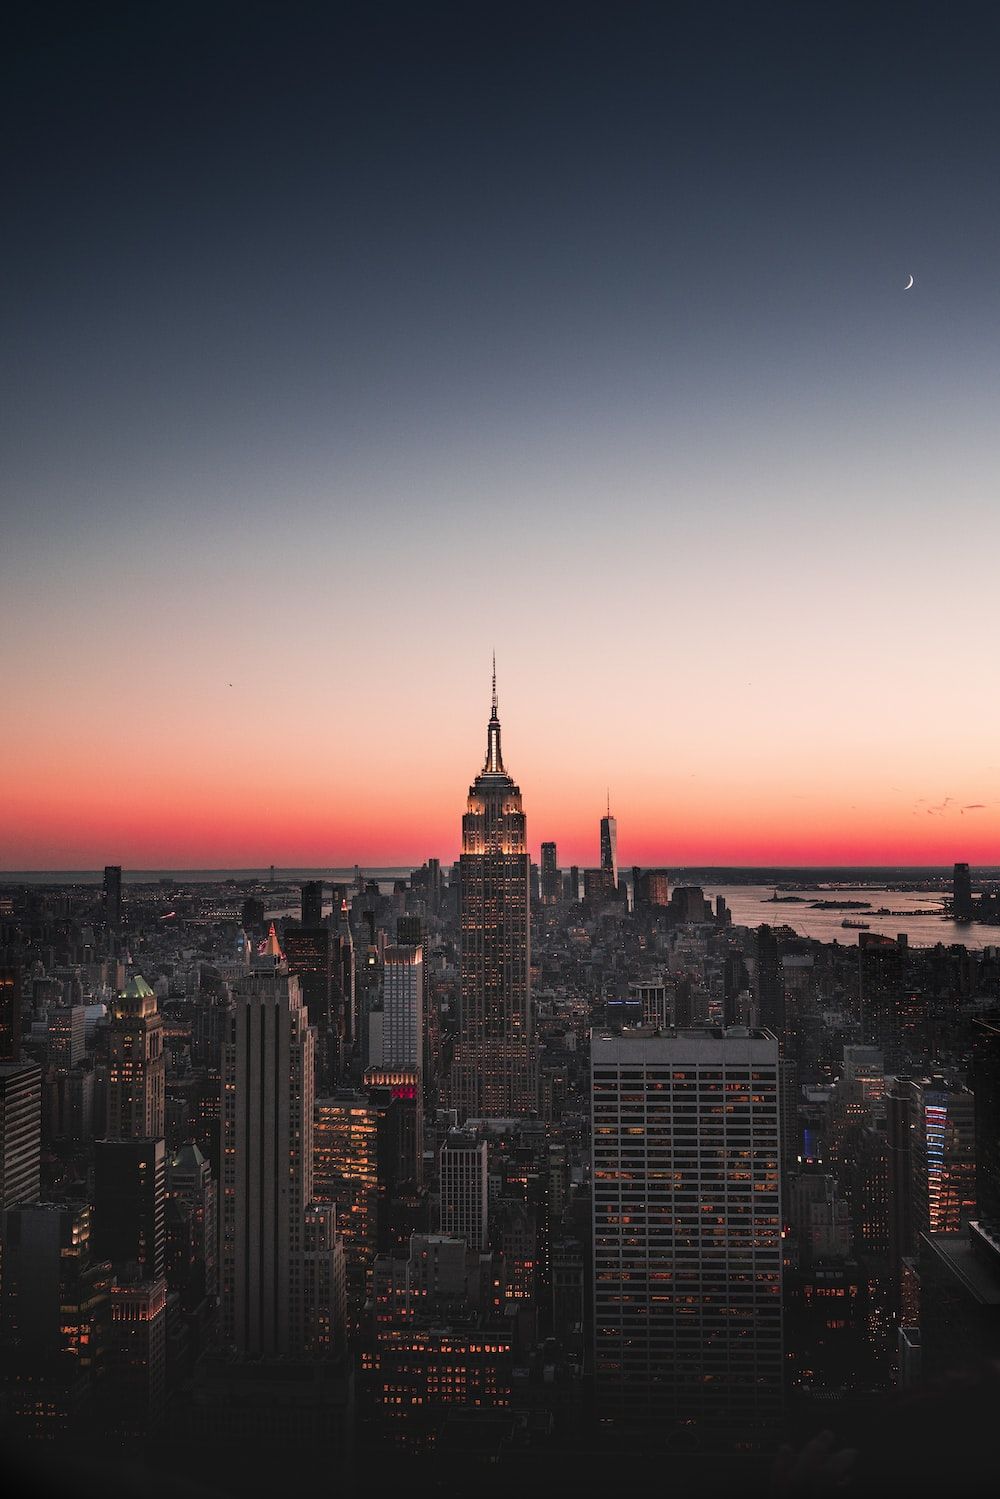 A cityscape at sunset with the moon in the sky. - Sunset, New York, landscape, city